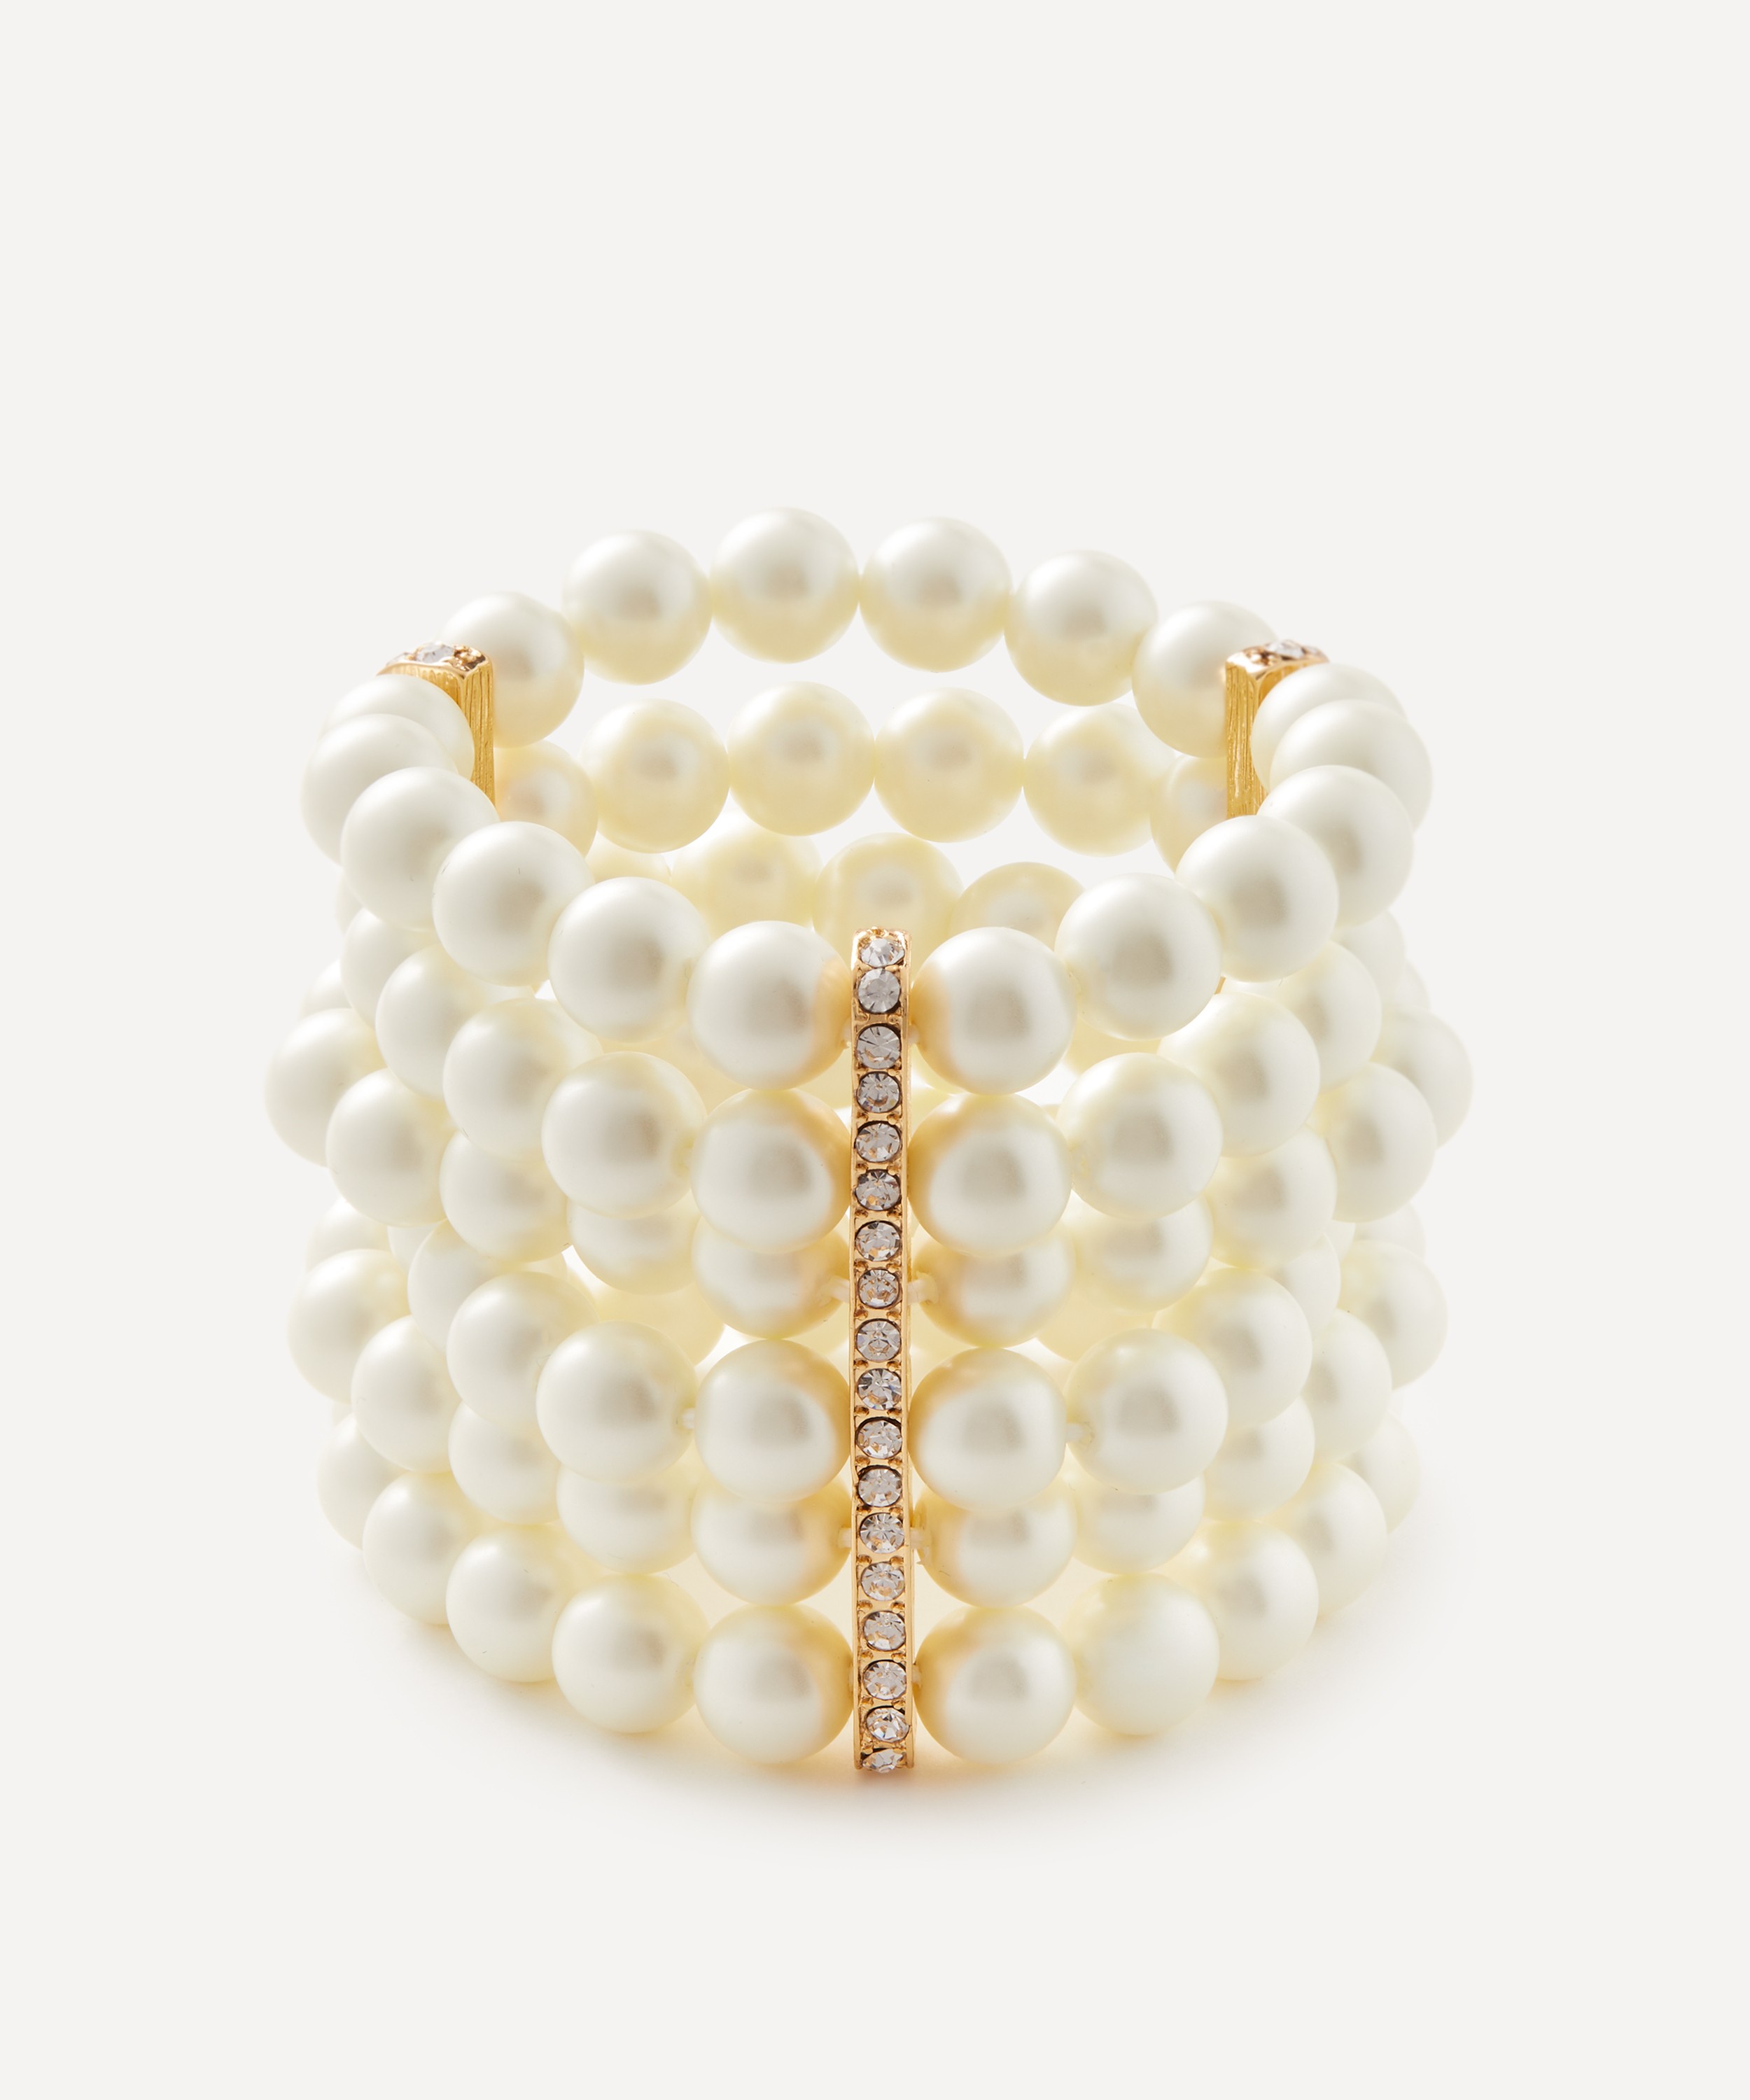 Kenneth Jay Lane - Gold-Plated 6 Row Pearl and Crystal Station Bracelet